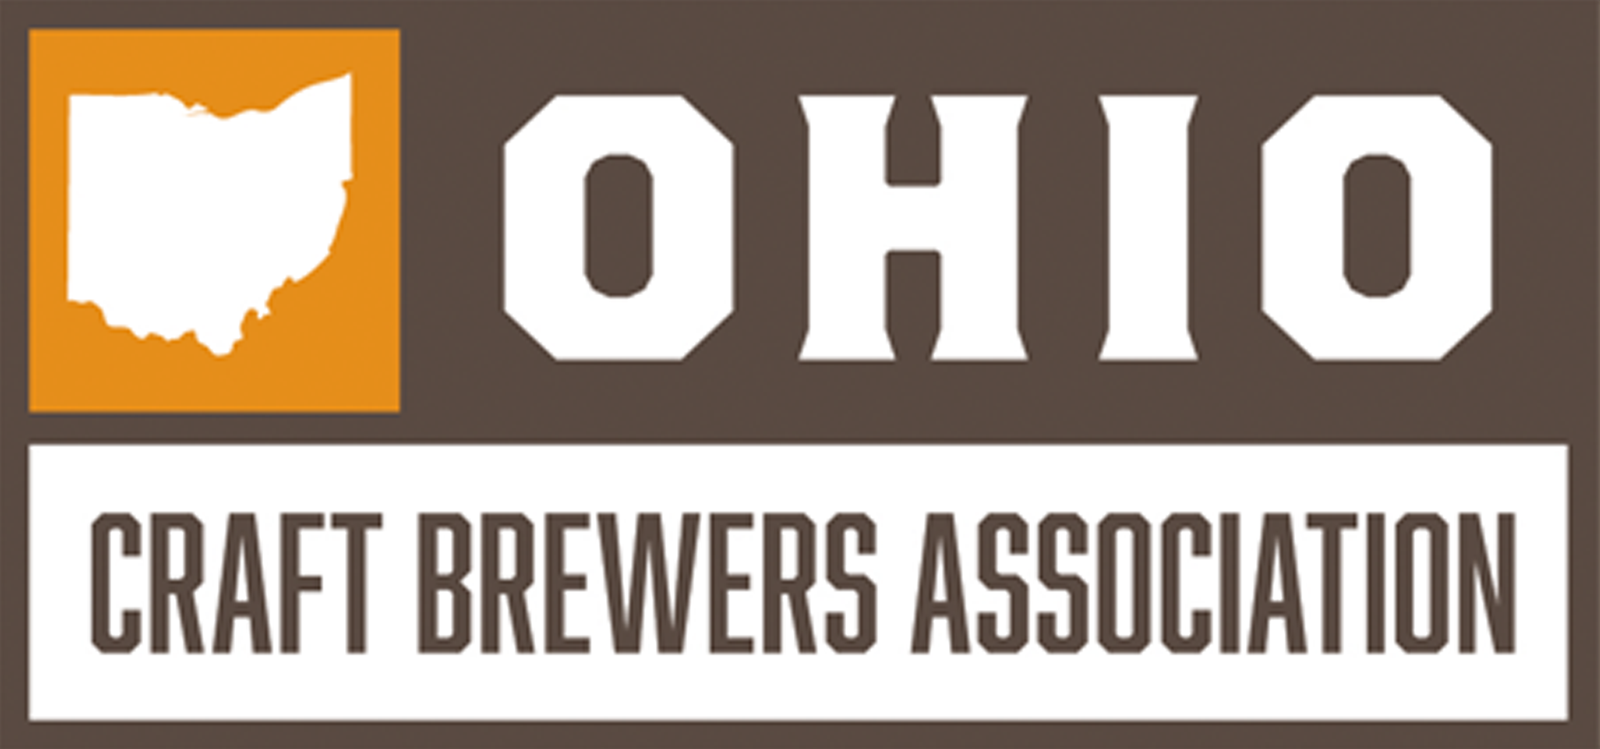 Ohio Craft Brewers Association - The Common Beer Company